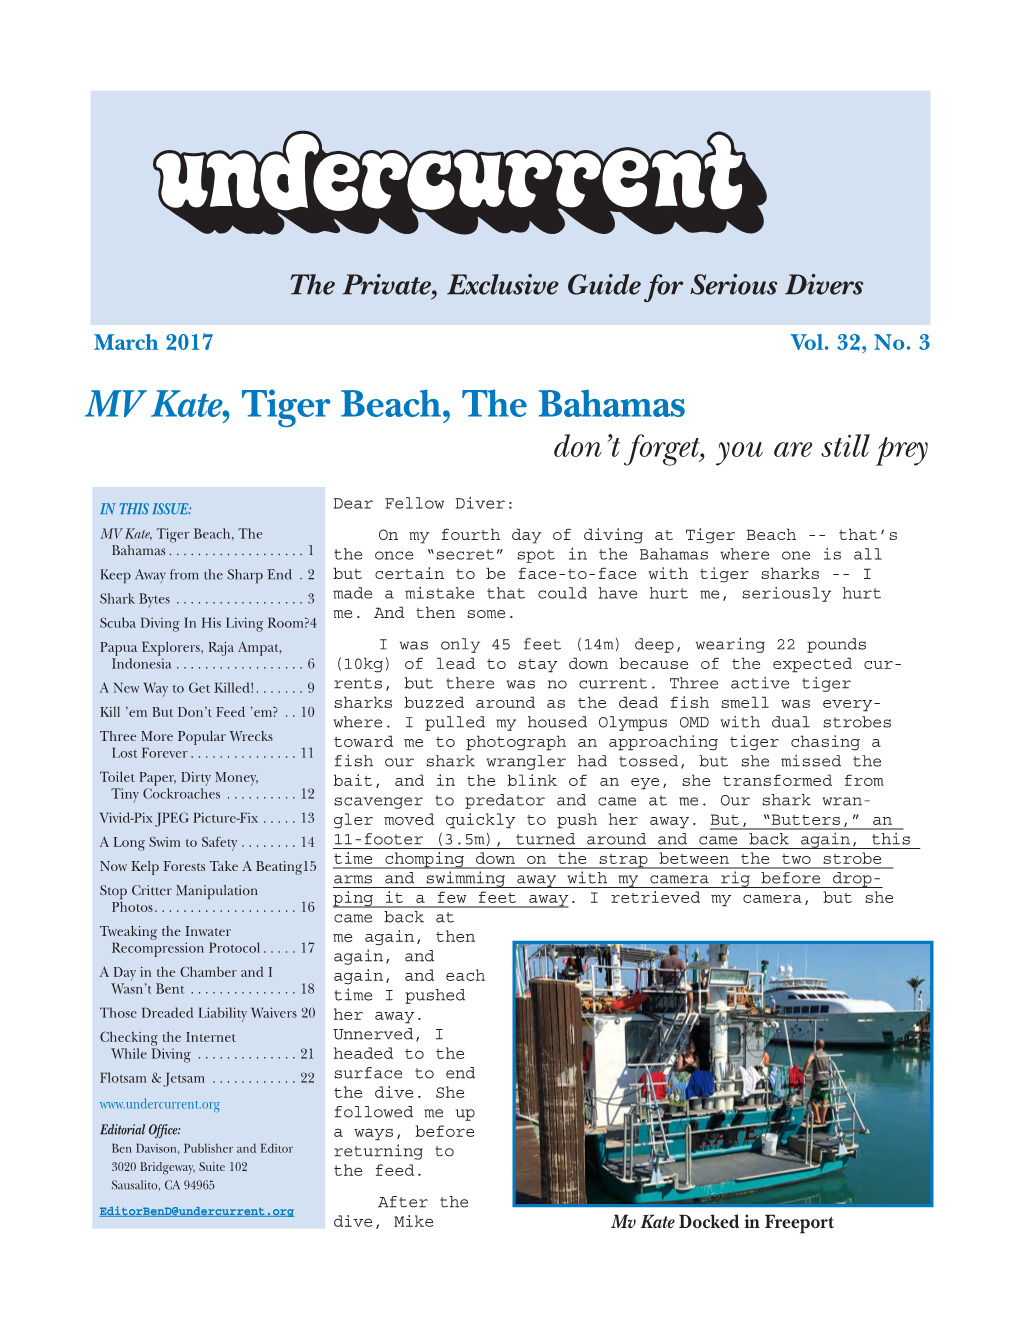 MV Kate, Tiger Beach, the Bahamas + [Other Articles] Undercurrent